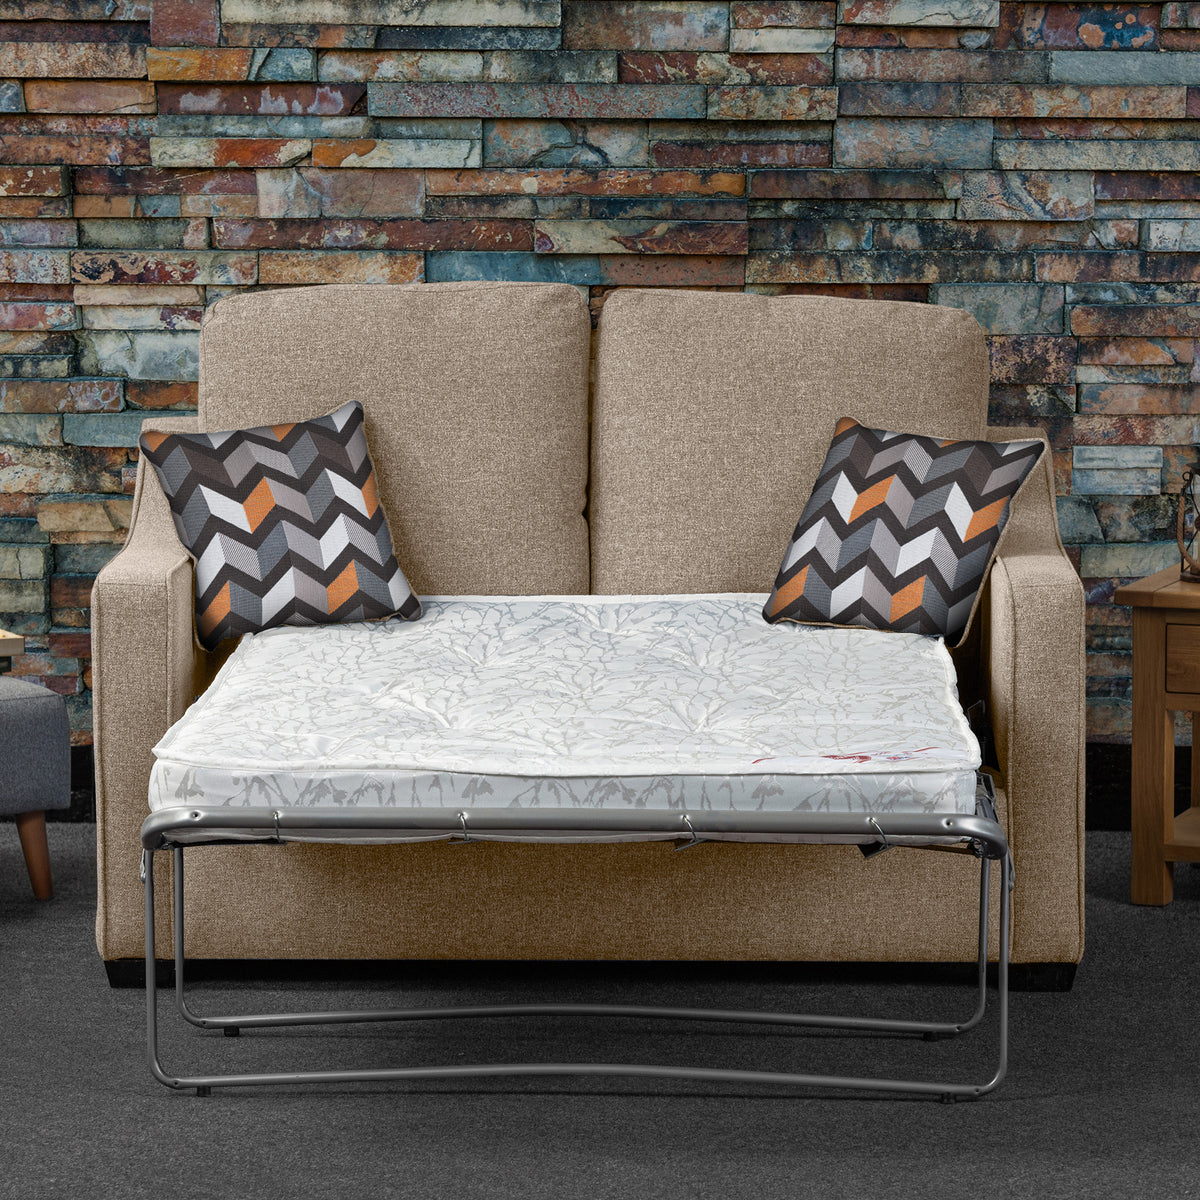 Fenton Fawn Soft Weave 2 Seater Sofabed with Charcoal Scatter Cushions from Roseland Furniture